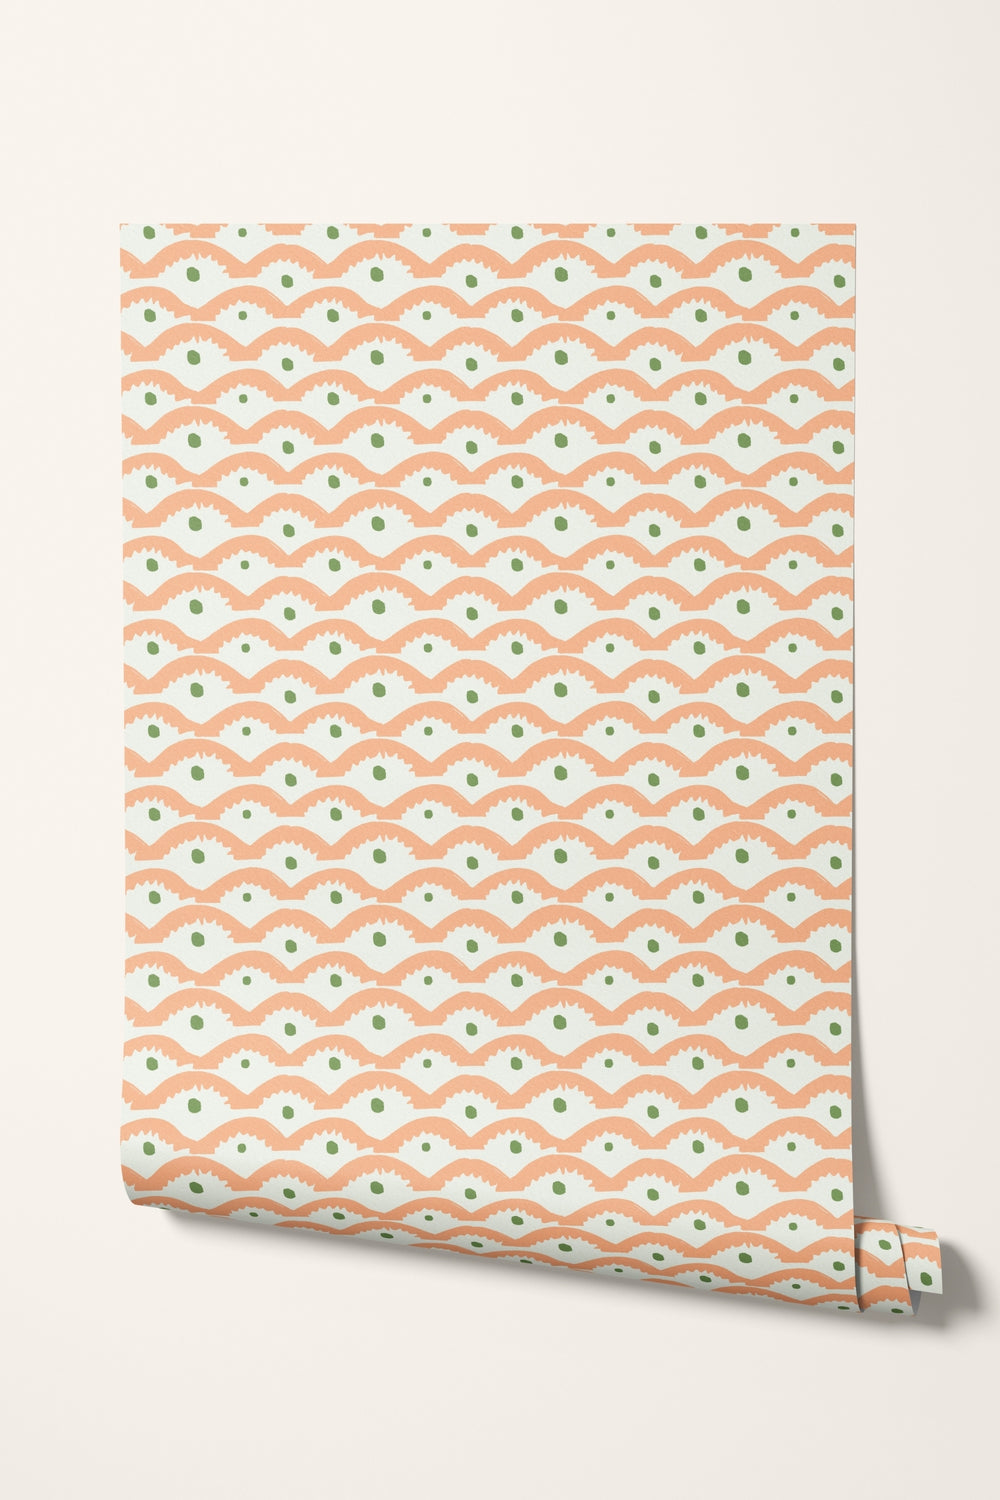 Wiggly Squiggly Wallpaper ~ Peachy